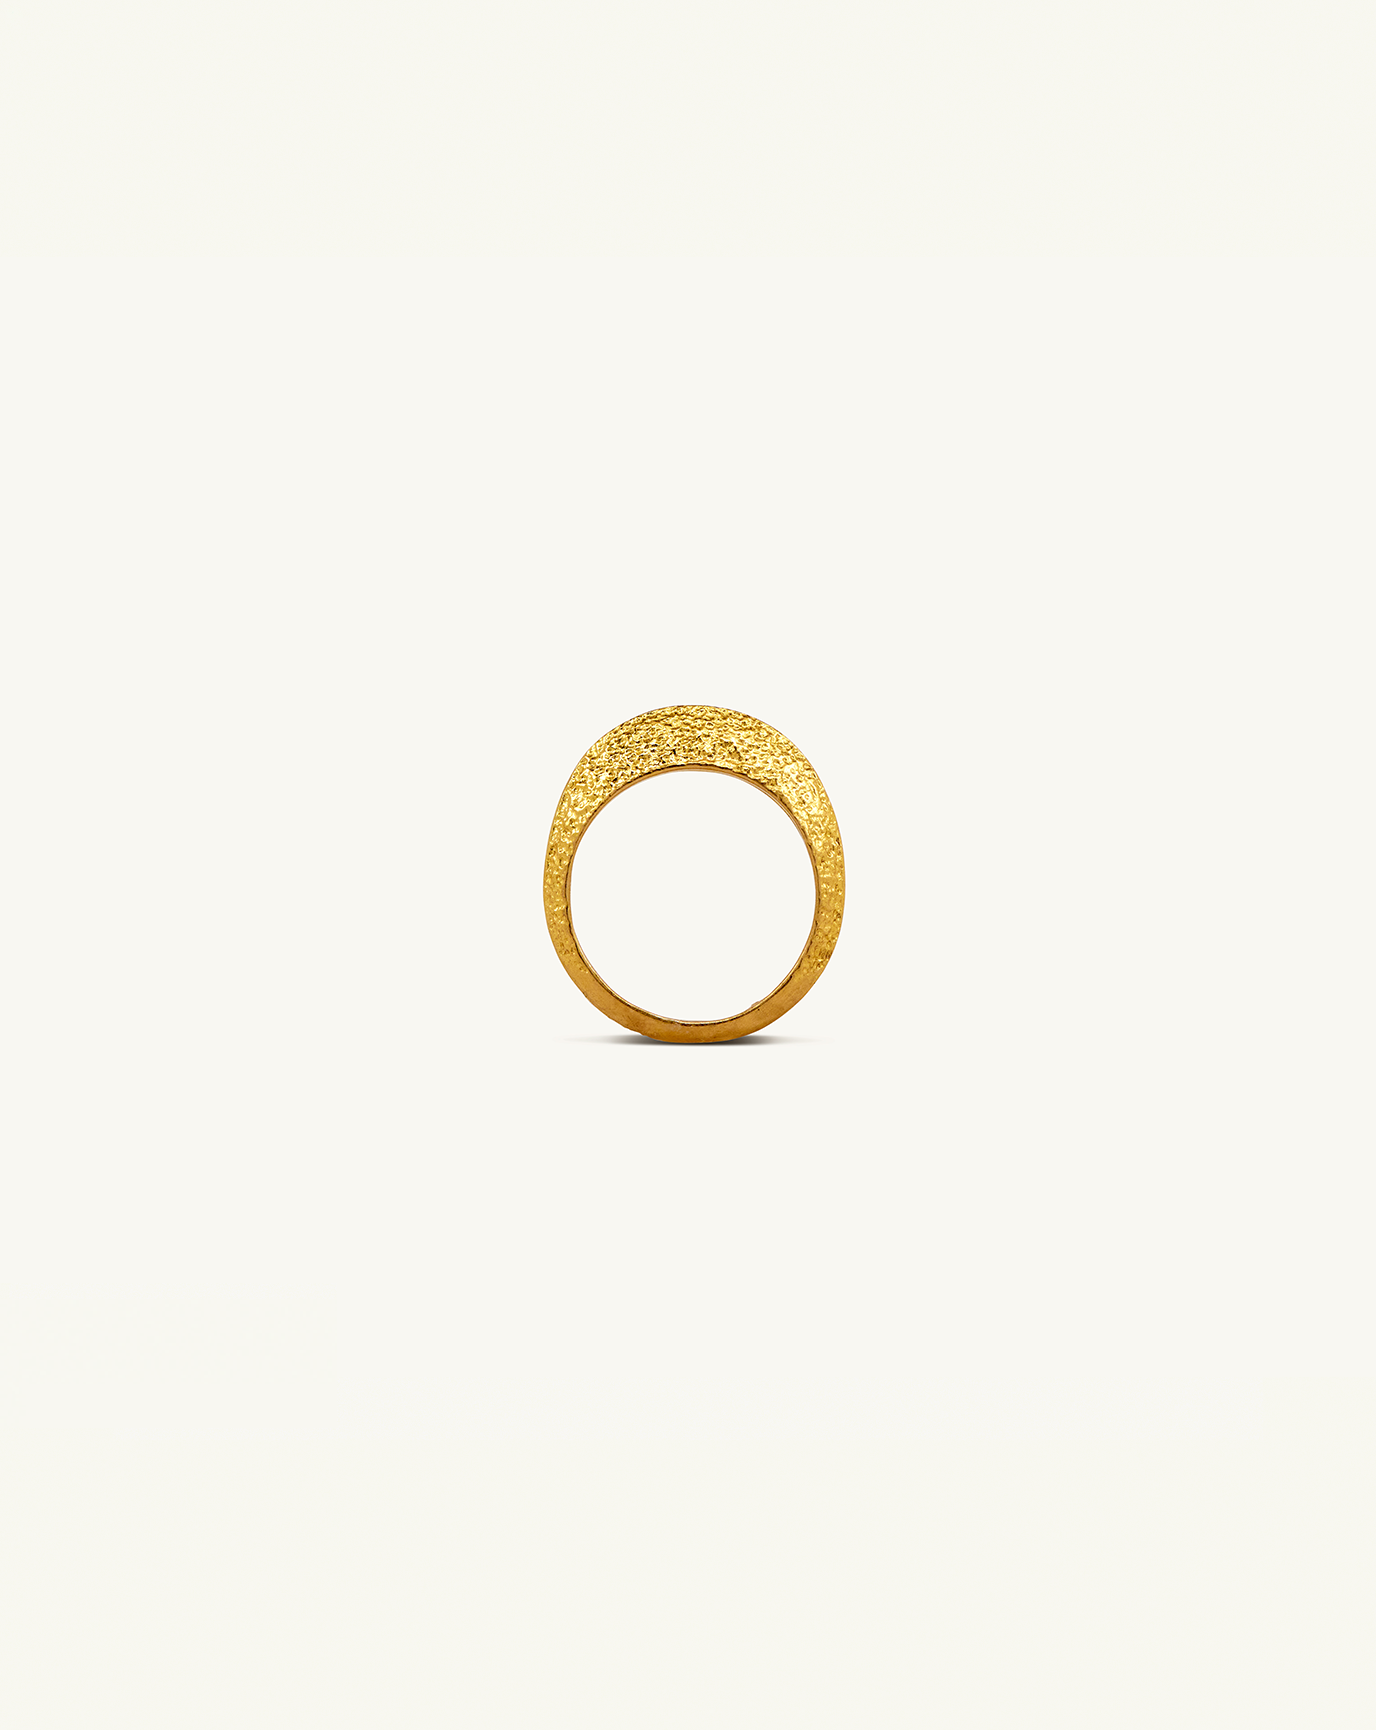 product view of the textured gold sculptural ring